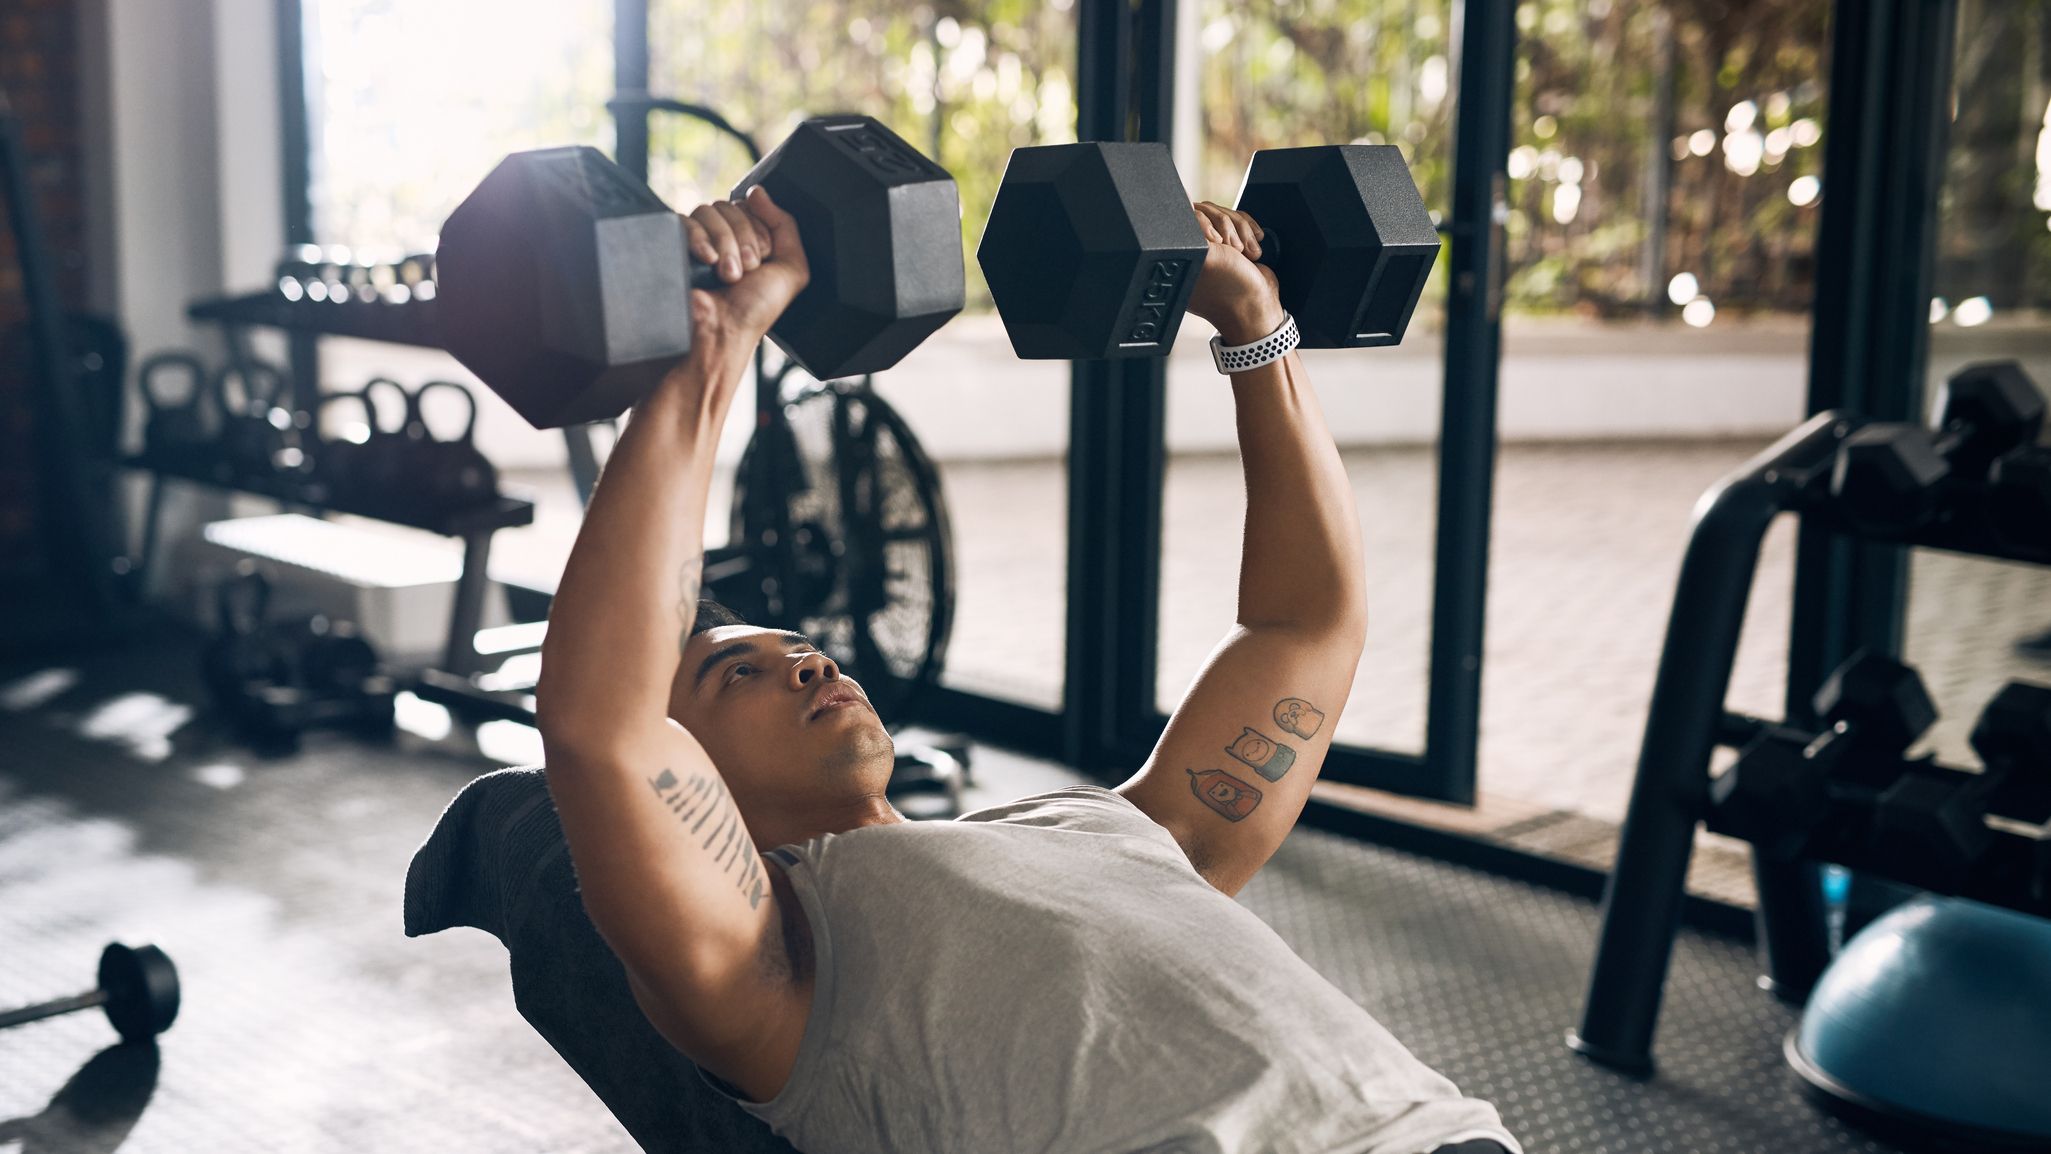 Dumbbell Chest Workout Without A Bench: 12 Exercises To Add